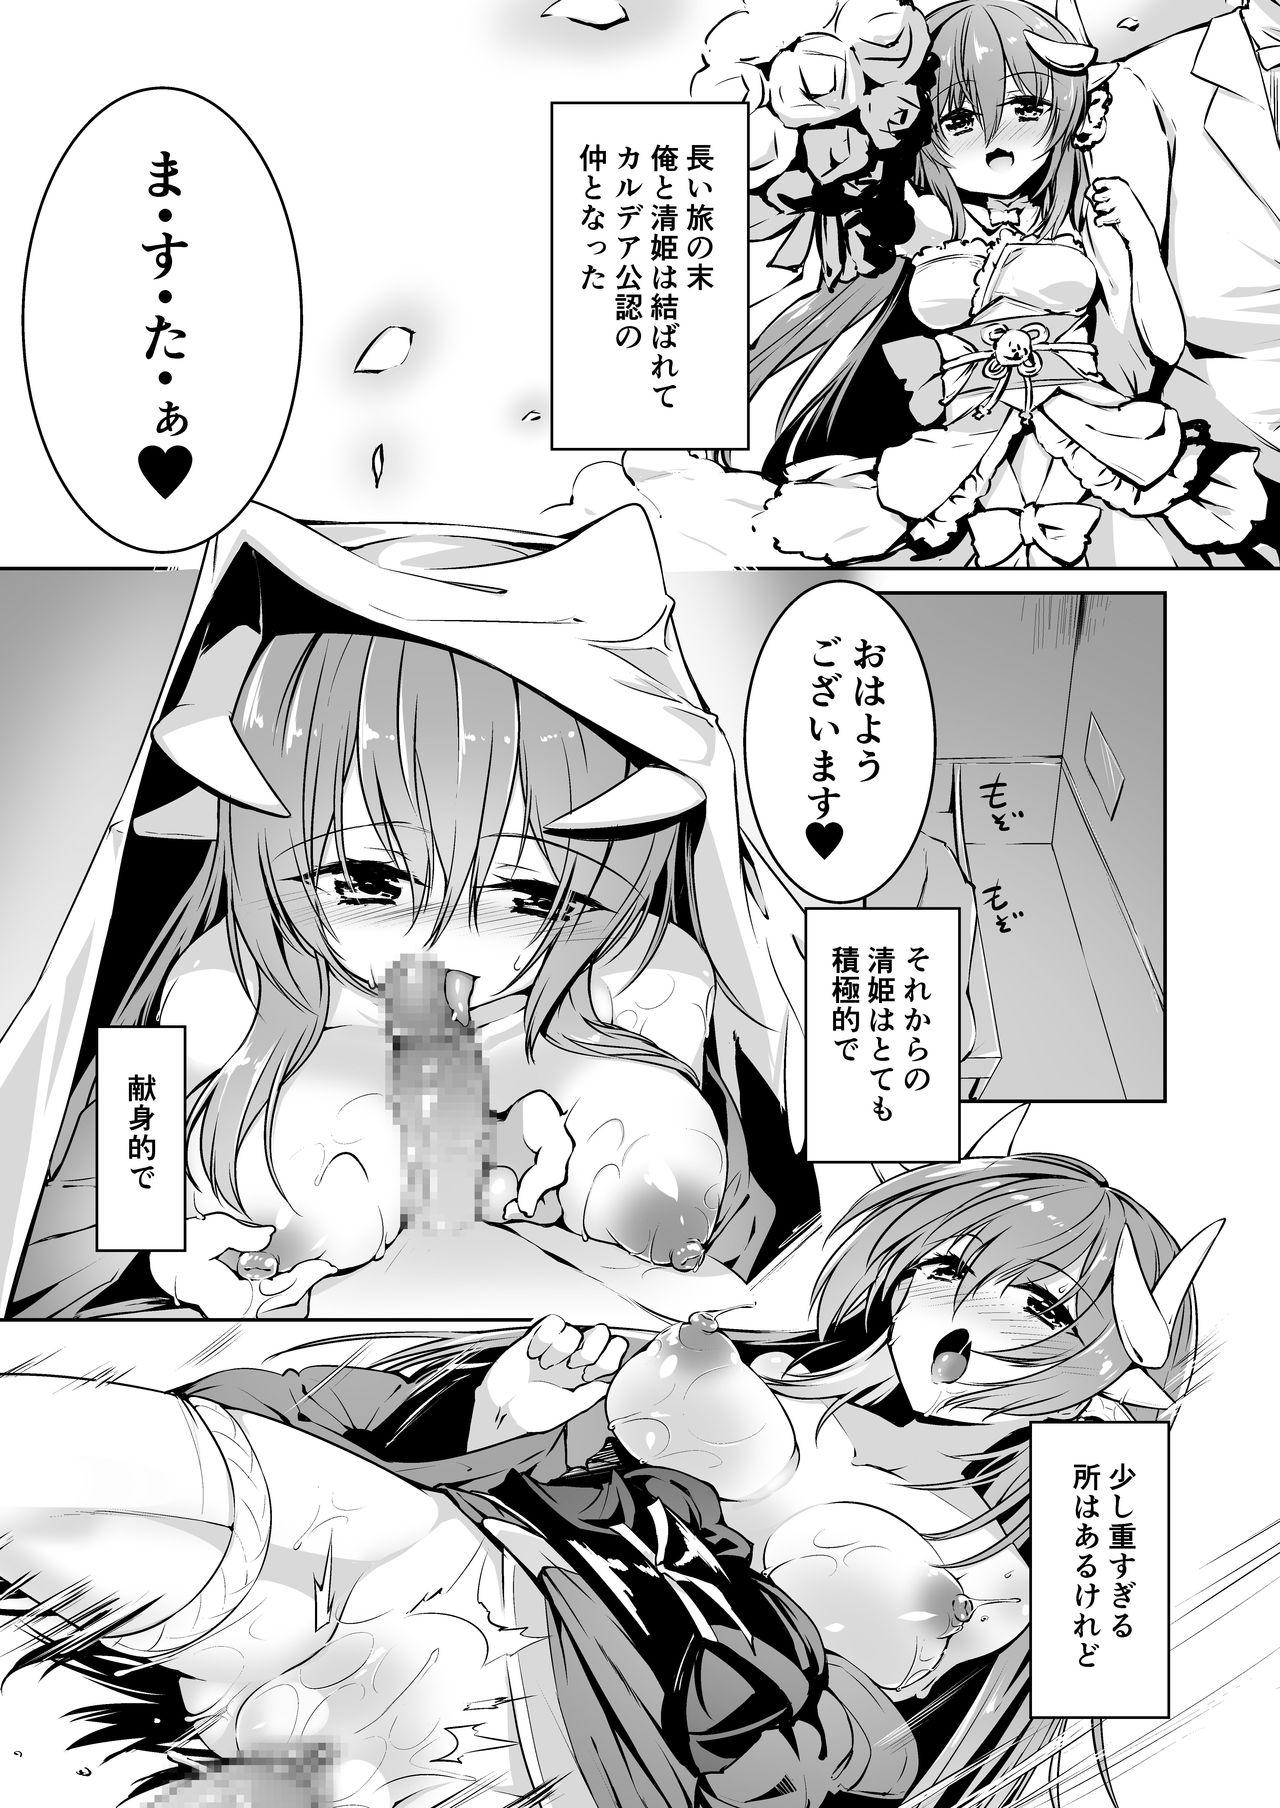 Babe Kiyohime Lovers vol. 02 - Fate grand order Private Sex - Page 4